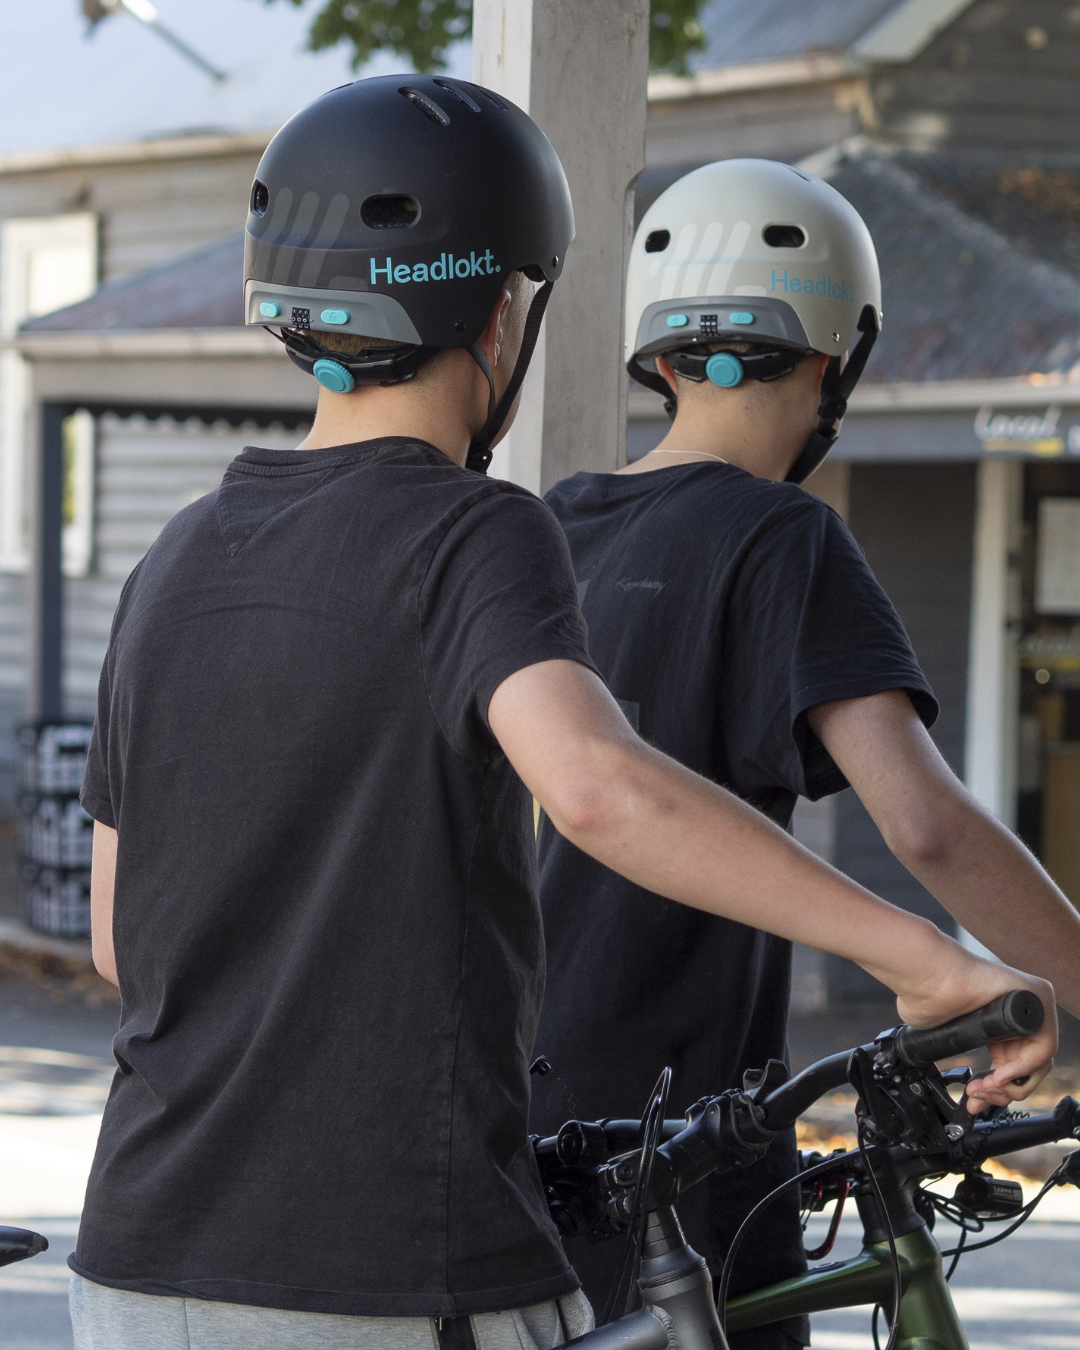 Why You Need to Replace Your Bike Helmet After a Crash